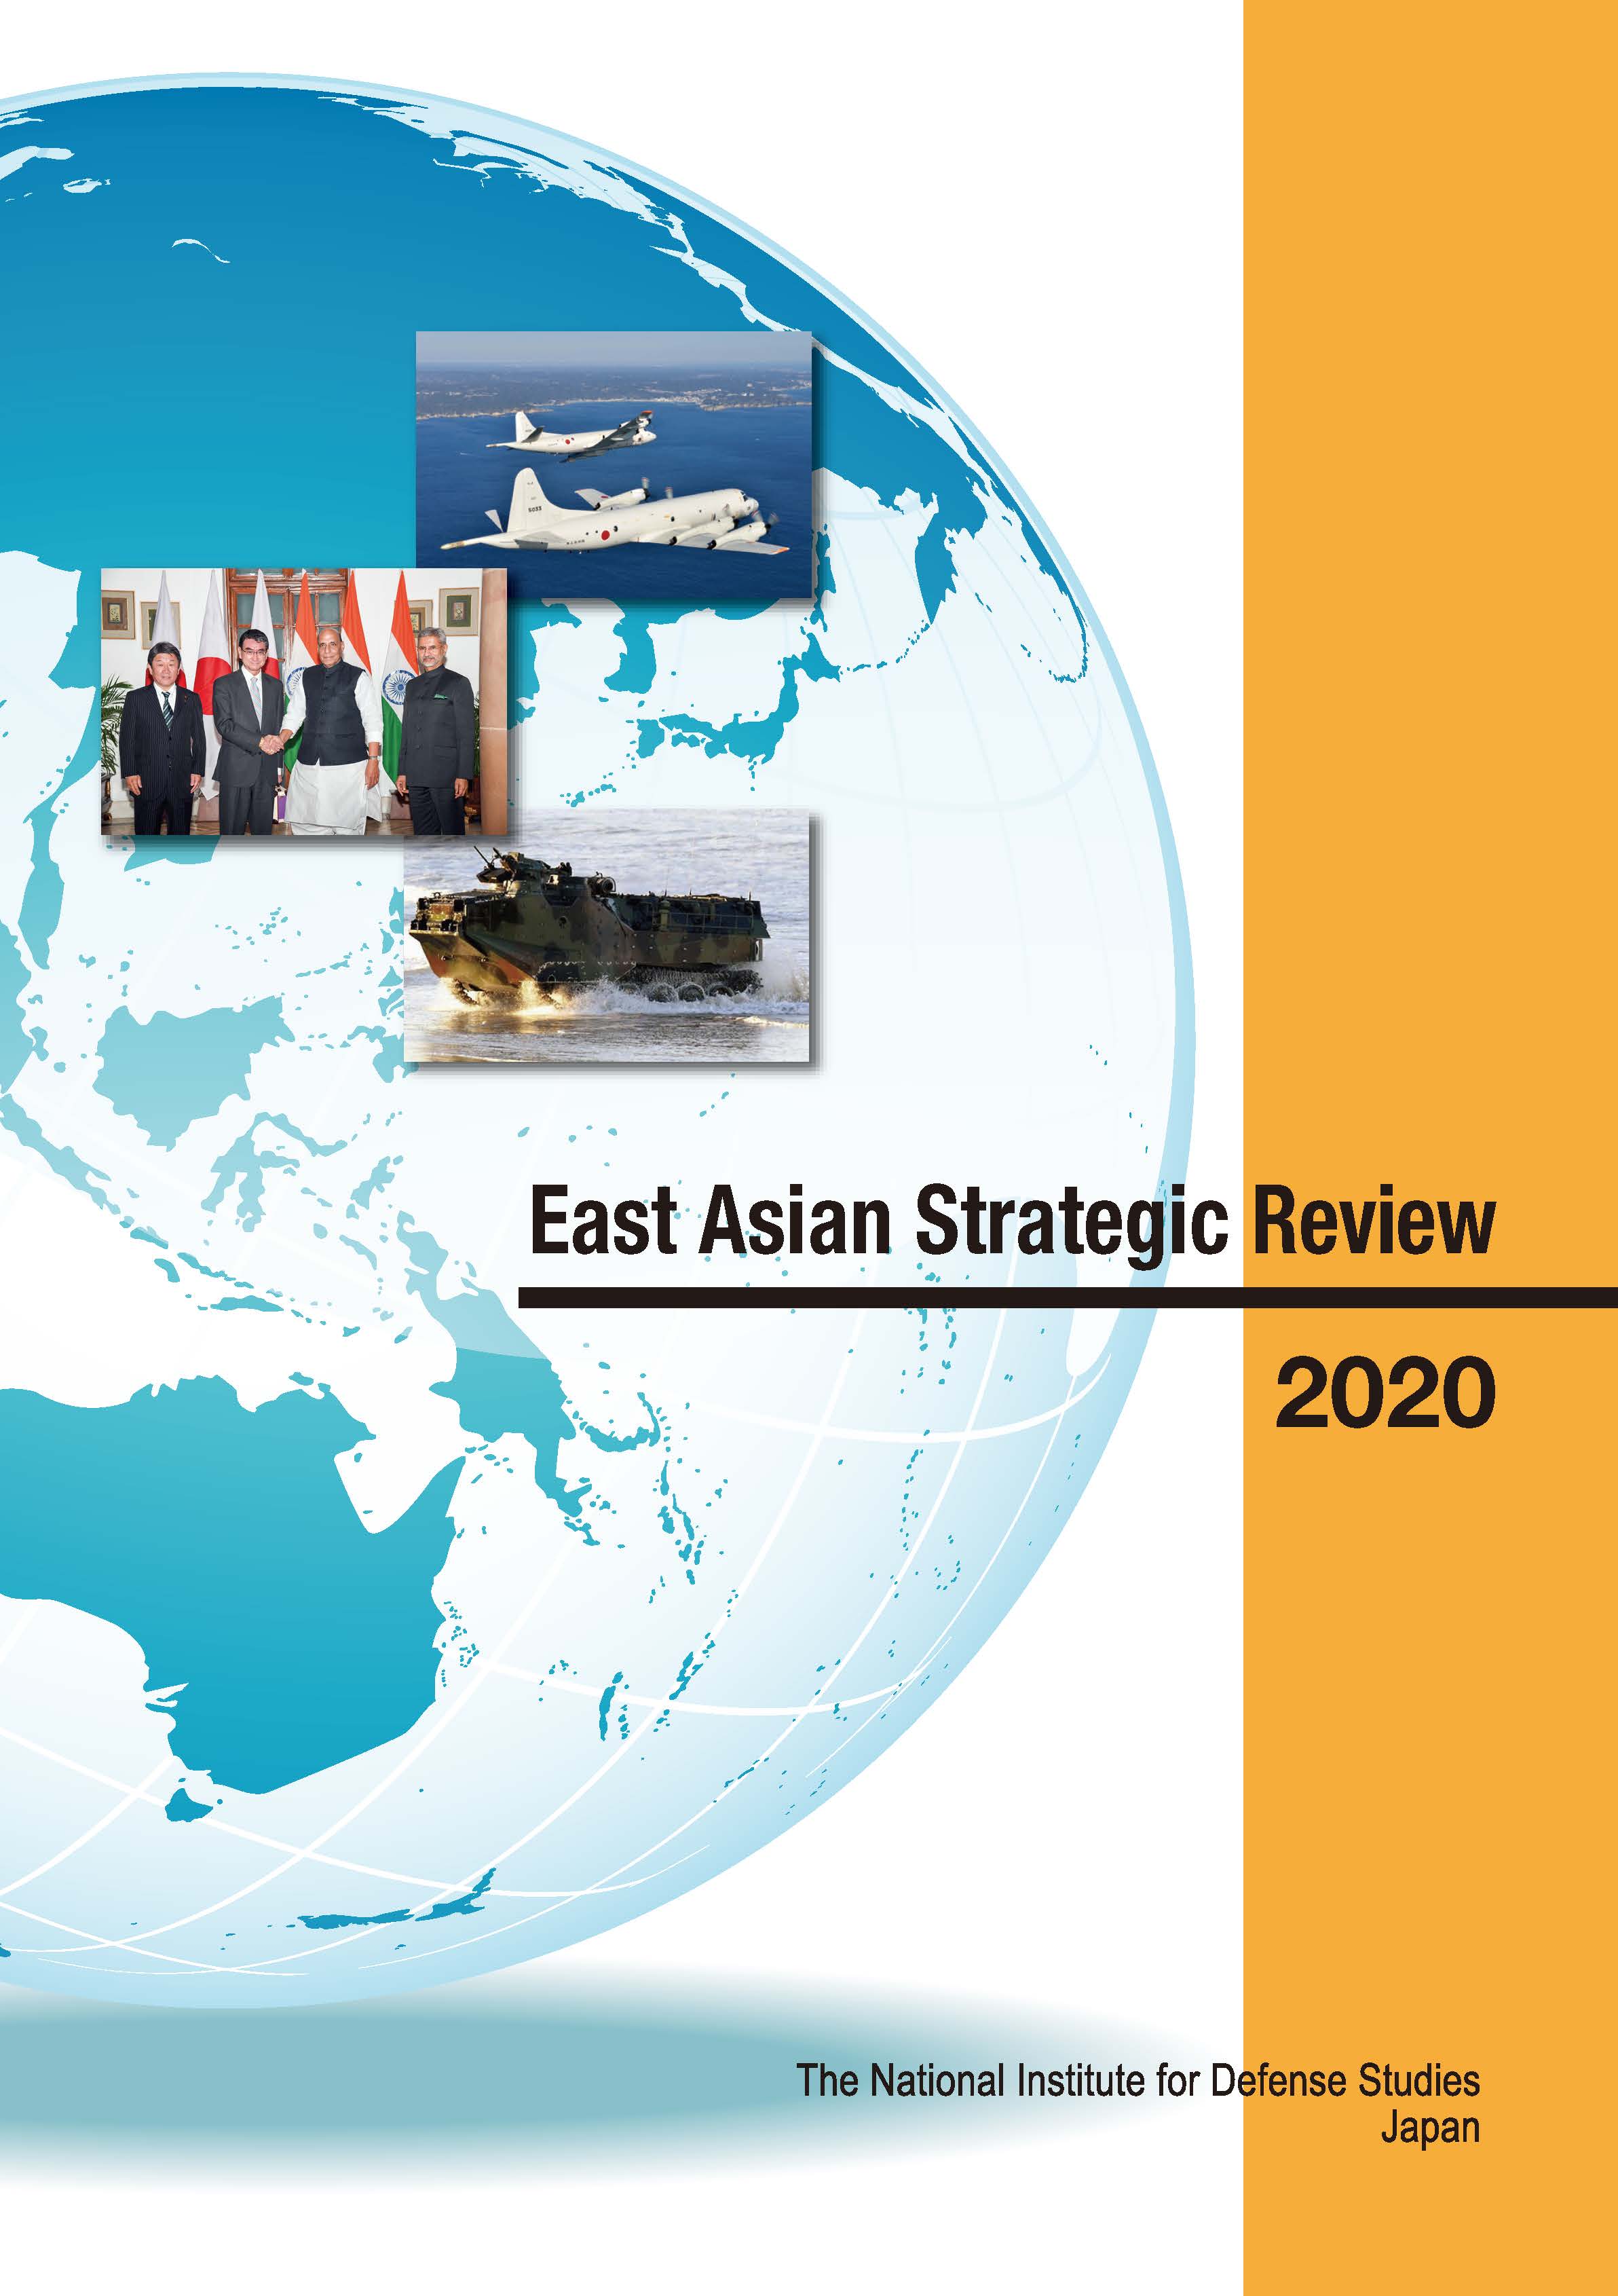 EAST ASIAN STRATEGIC REVIEW 2020